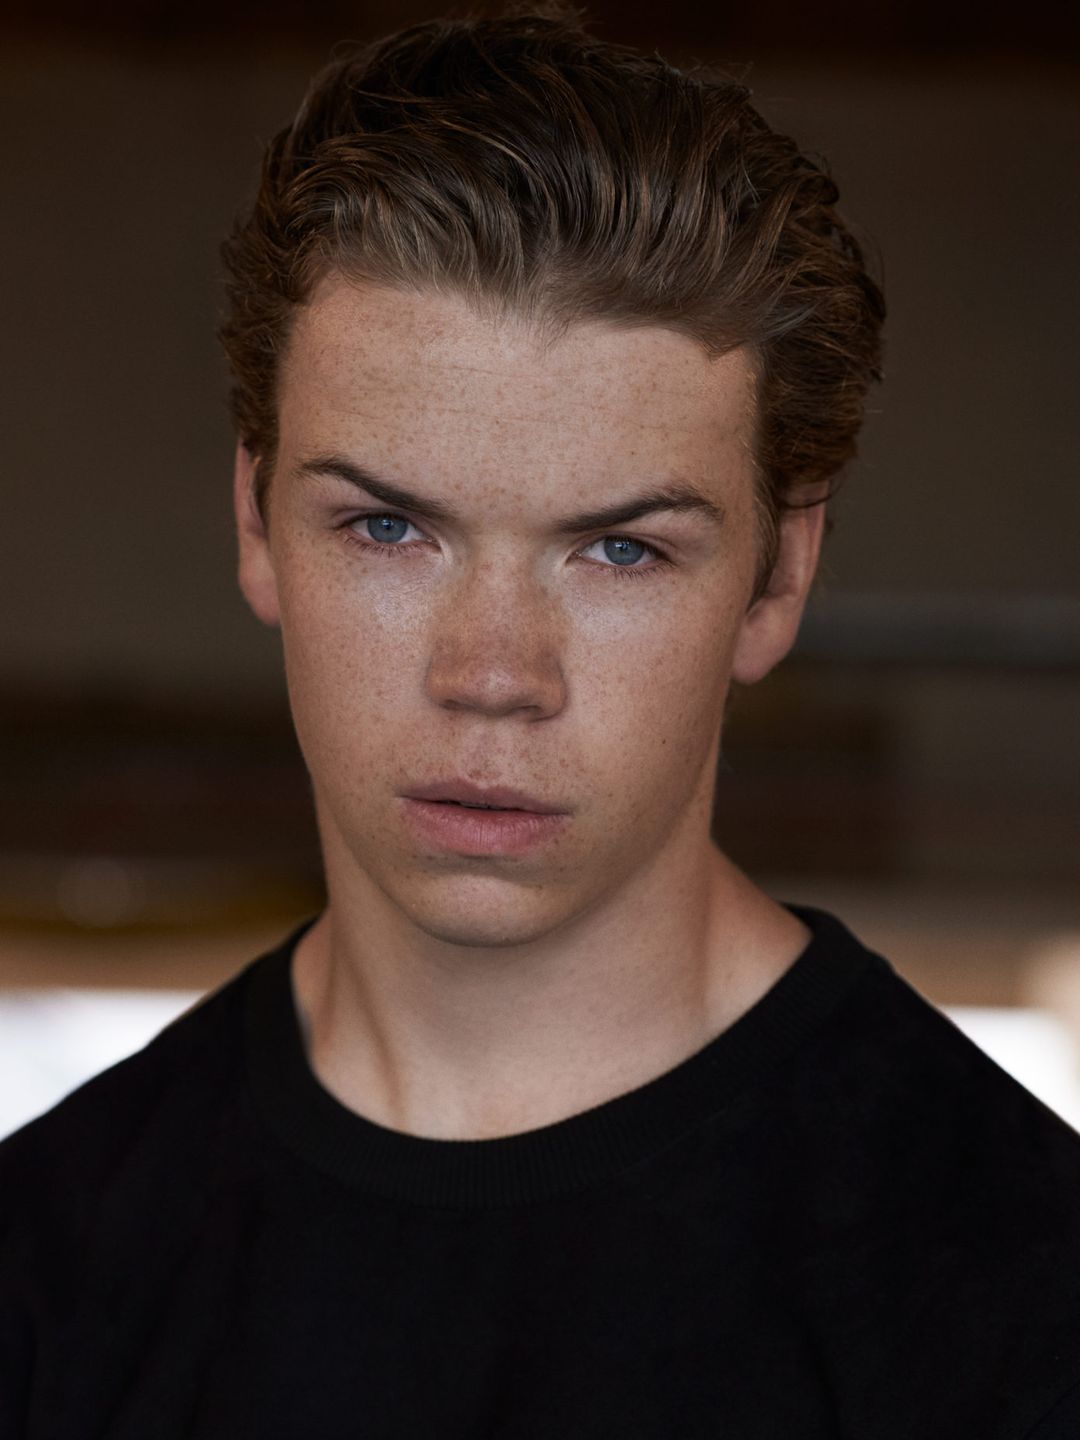 Will Poulter young age